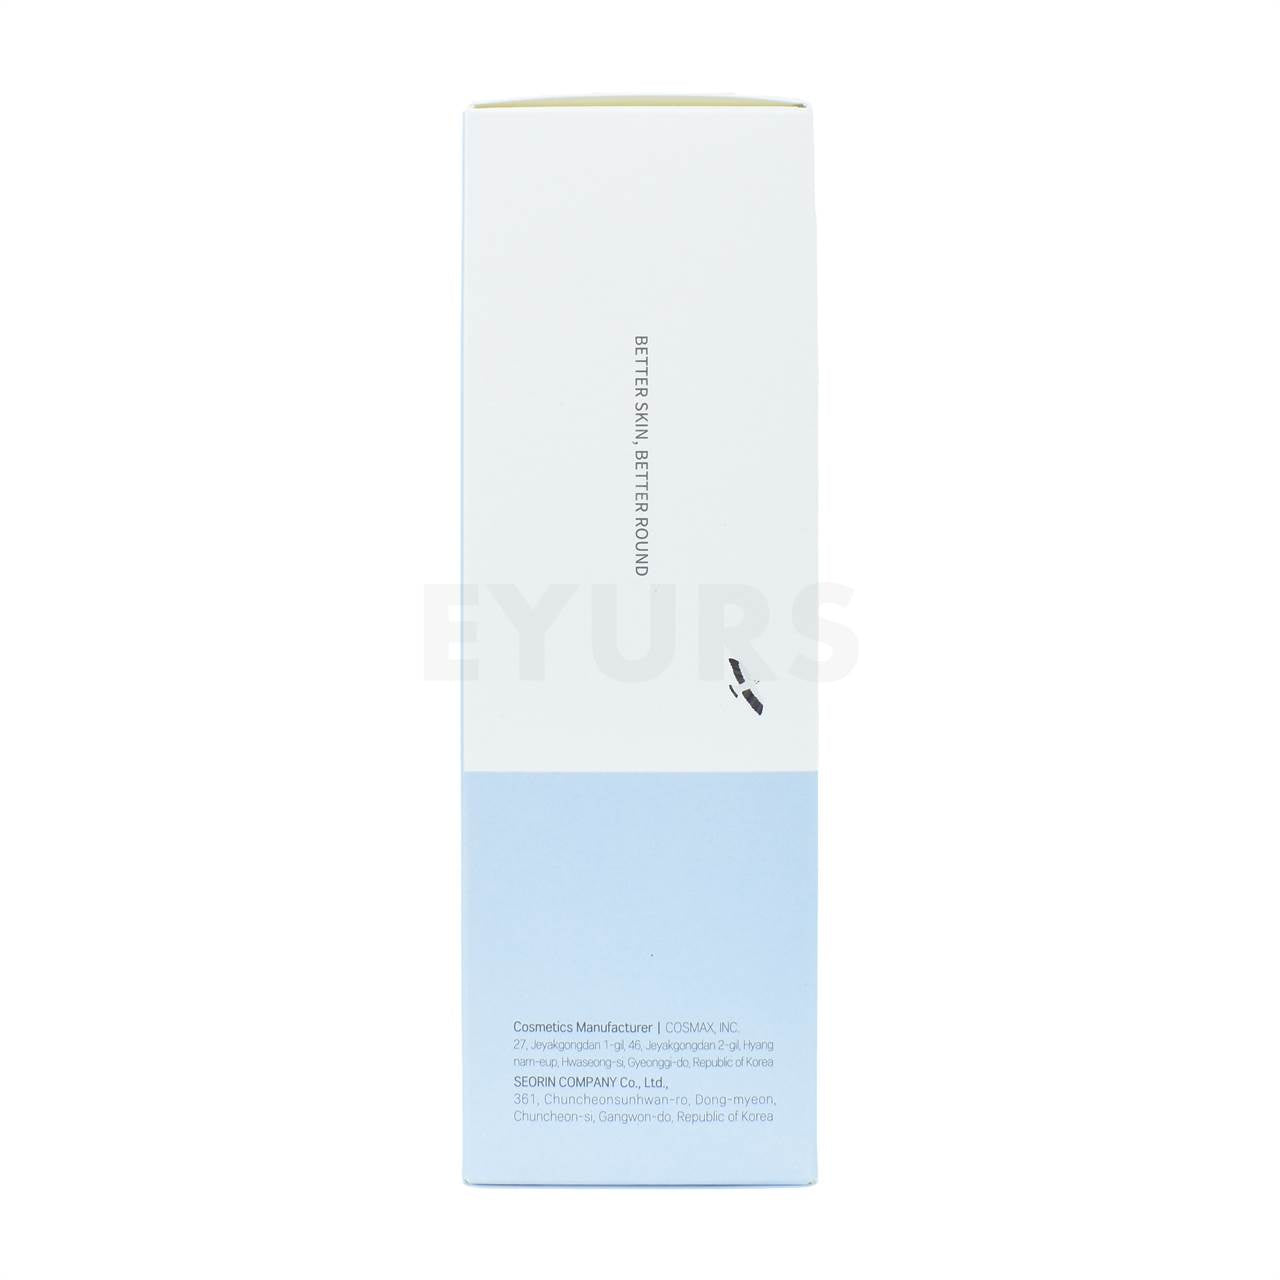 round lab 1025 dokdo cleansing oil 200ml left side packaging